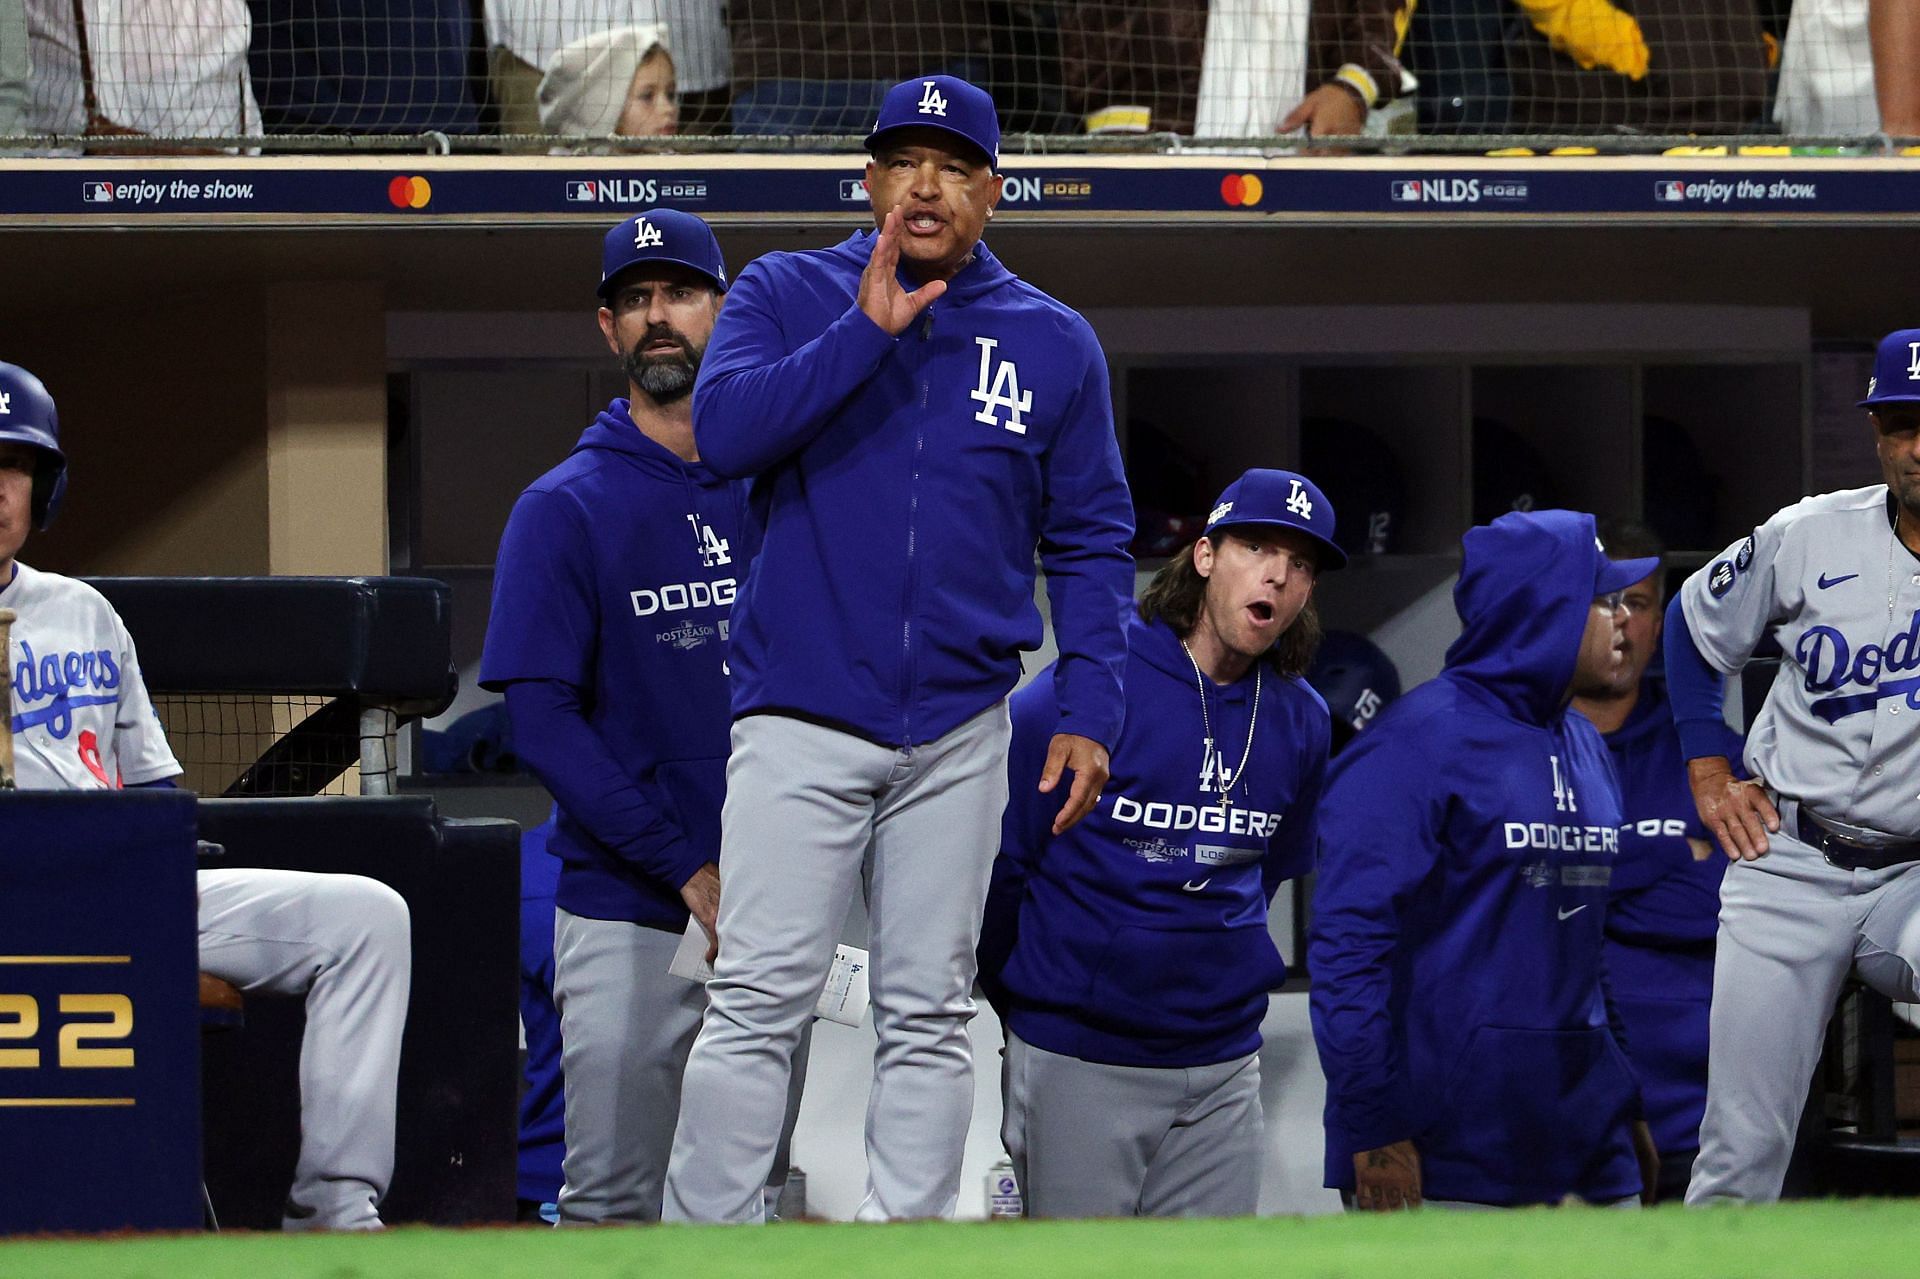 LA Dodgers fans agonize over teams elimination from postseason as San Diego Padres advance to NLCS